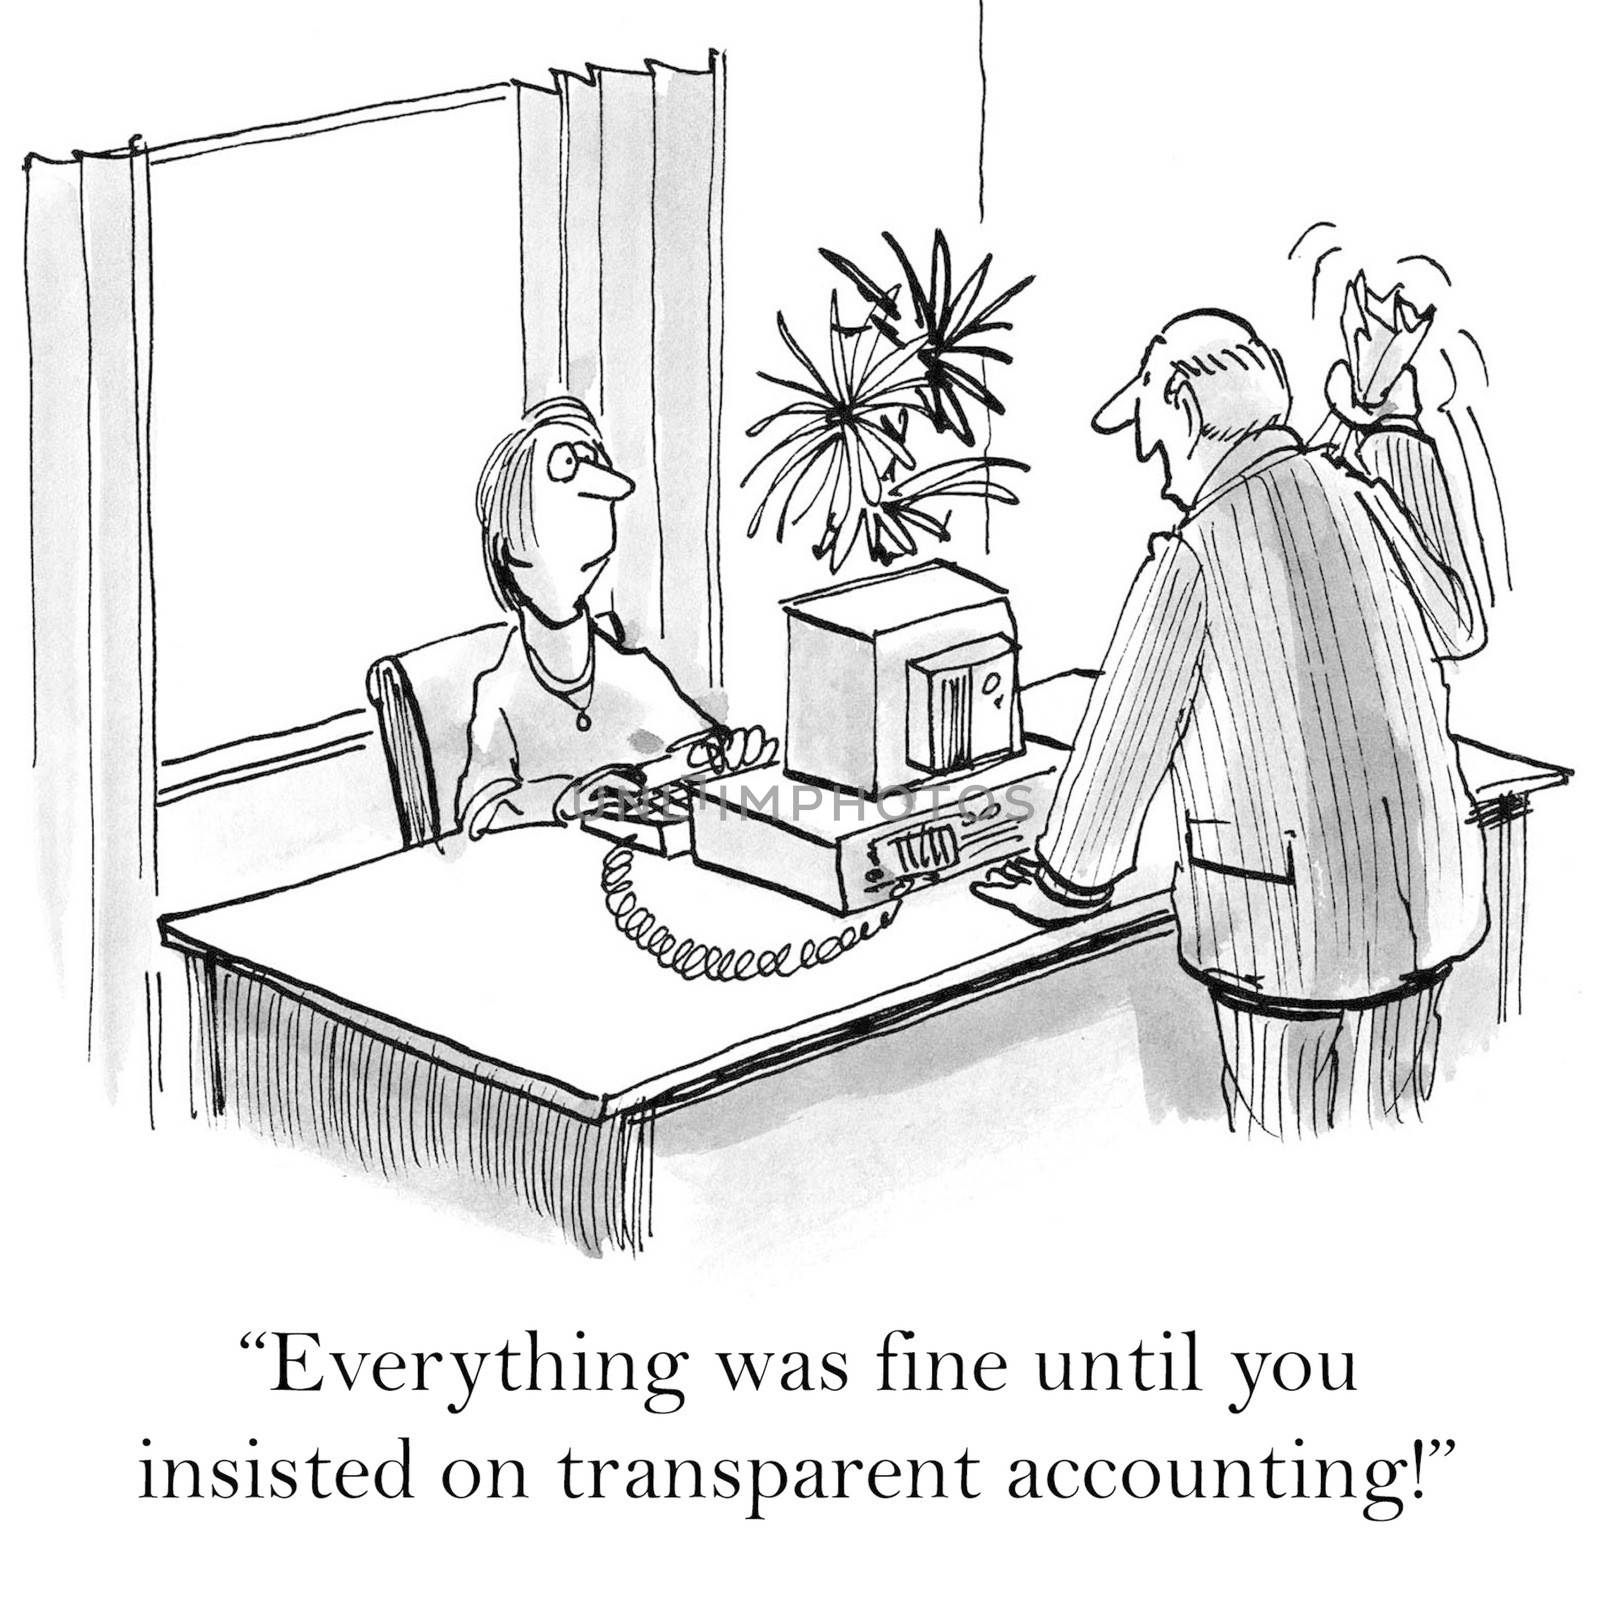 Transparent Accounting by andrewgenn